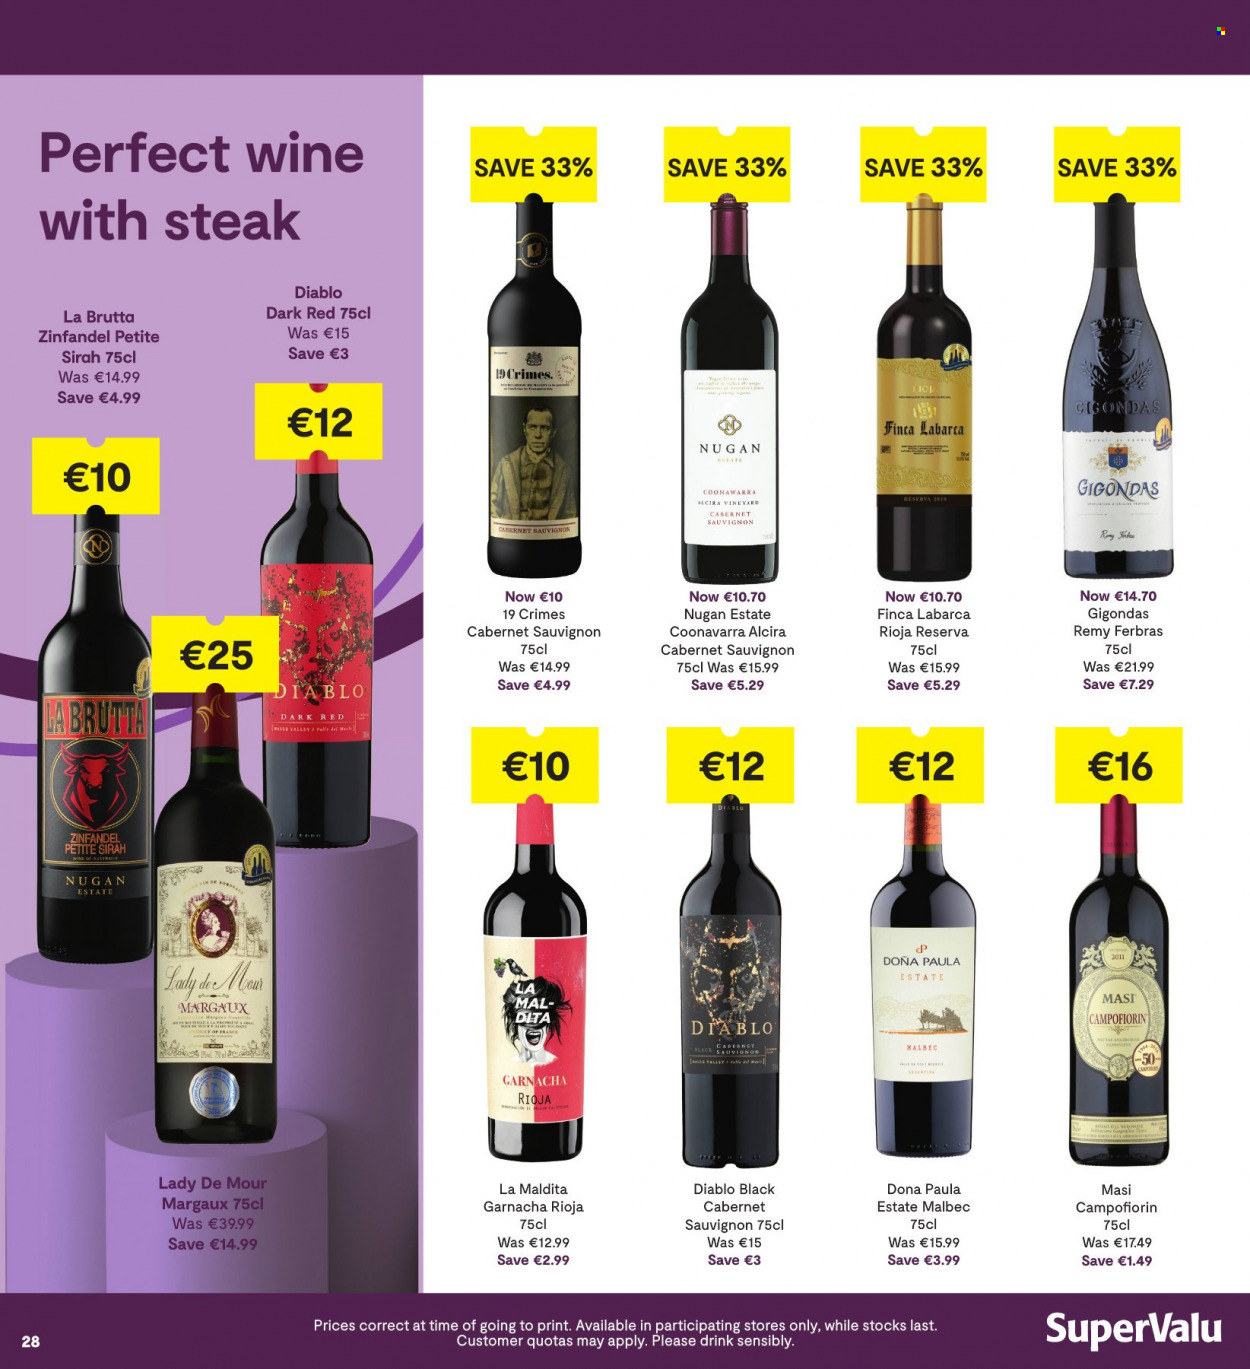 thumbnail - SuperValu offer  - 20.01.2022 - 02.02.2022 - Sales products - Cabernet Sauvignon, red wine, wine, Finca Labarca, steak. Page 28.